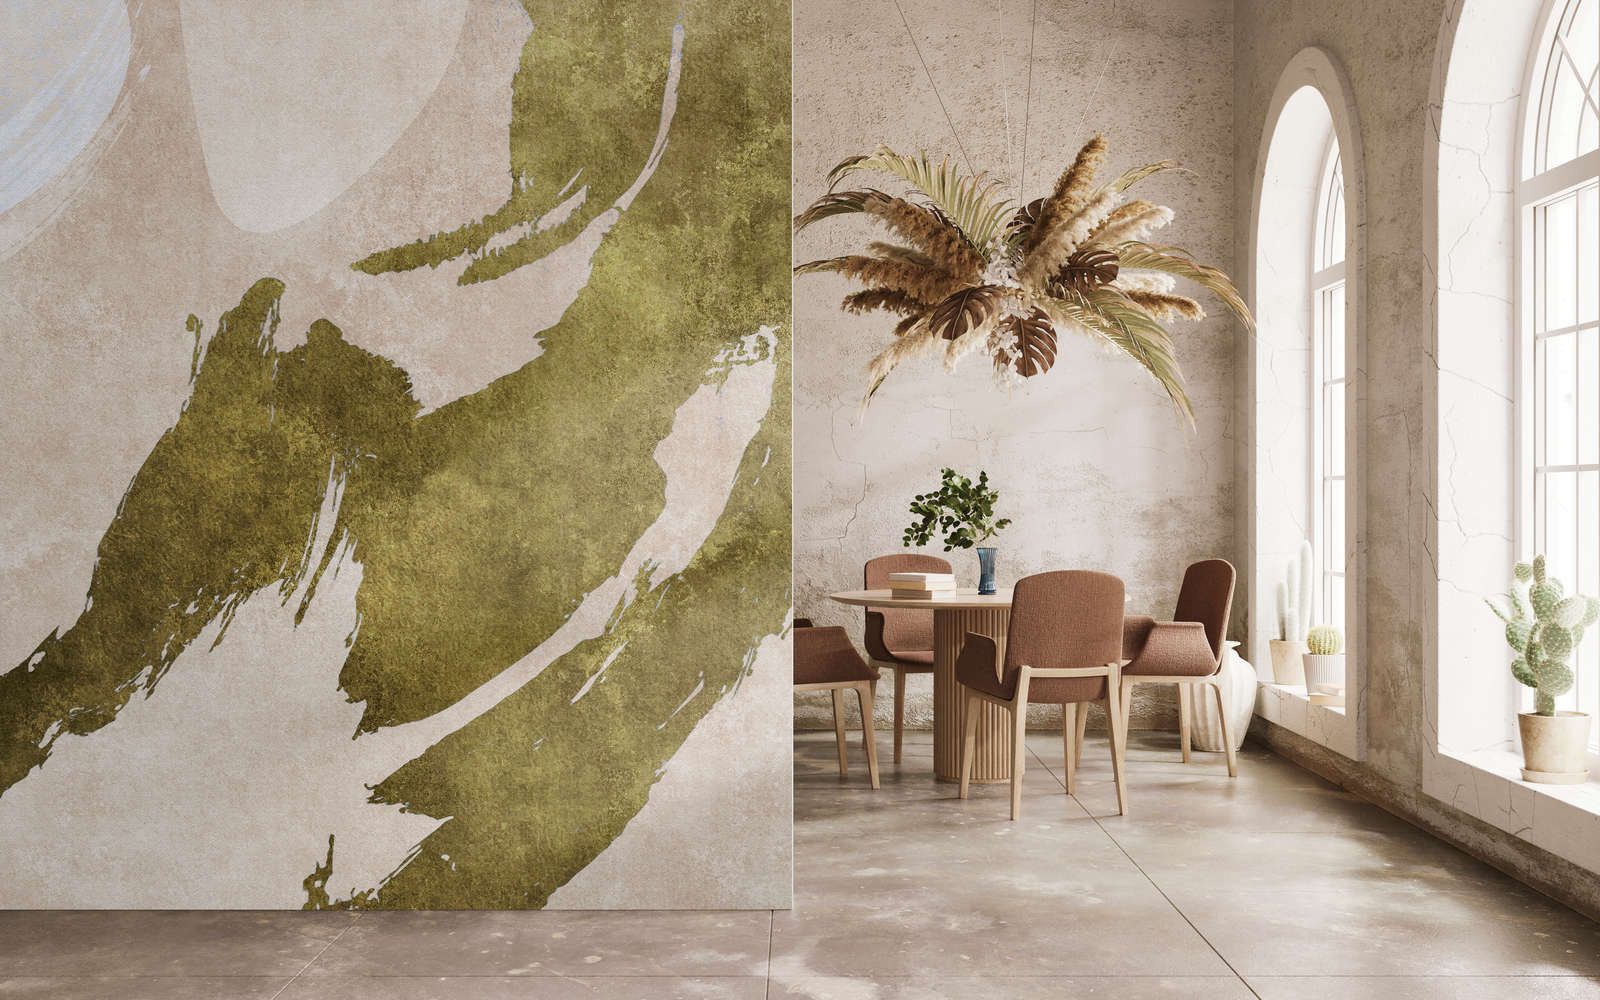             Photo wallpaper »temu« - Brushstrokes with abstract design - Green, cream with vintage plaster texture | Smooth, slightly pearlescent non-woven fabric
        